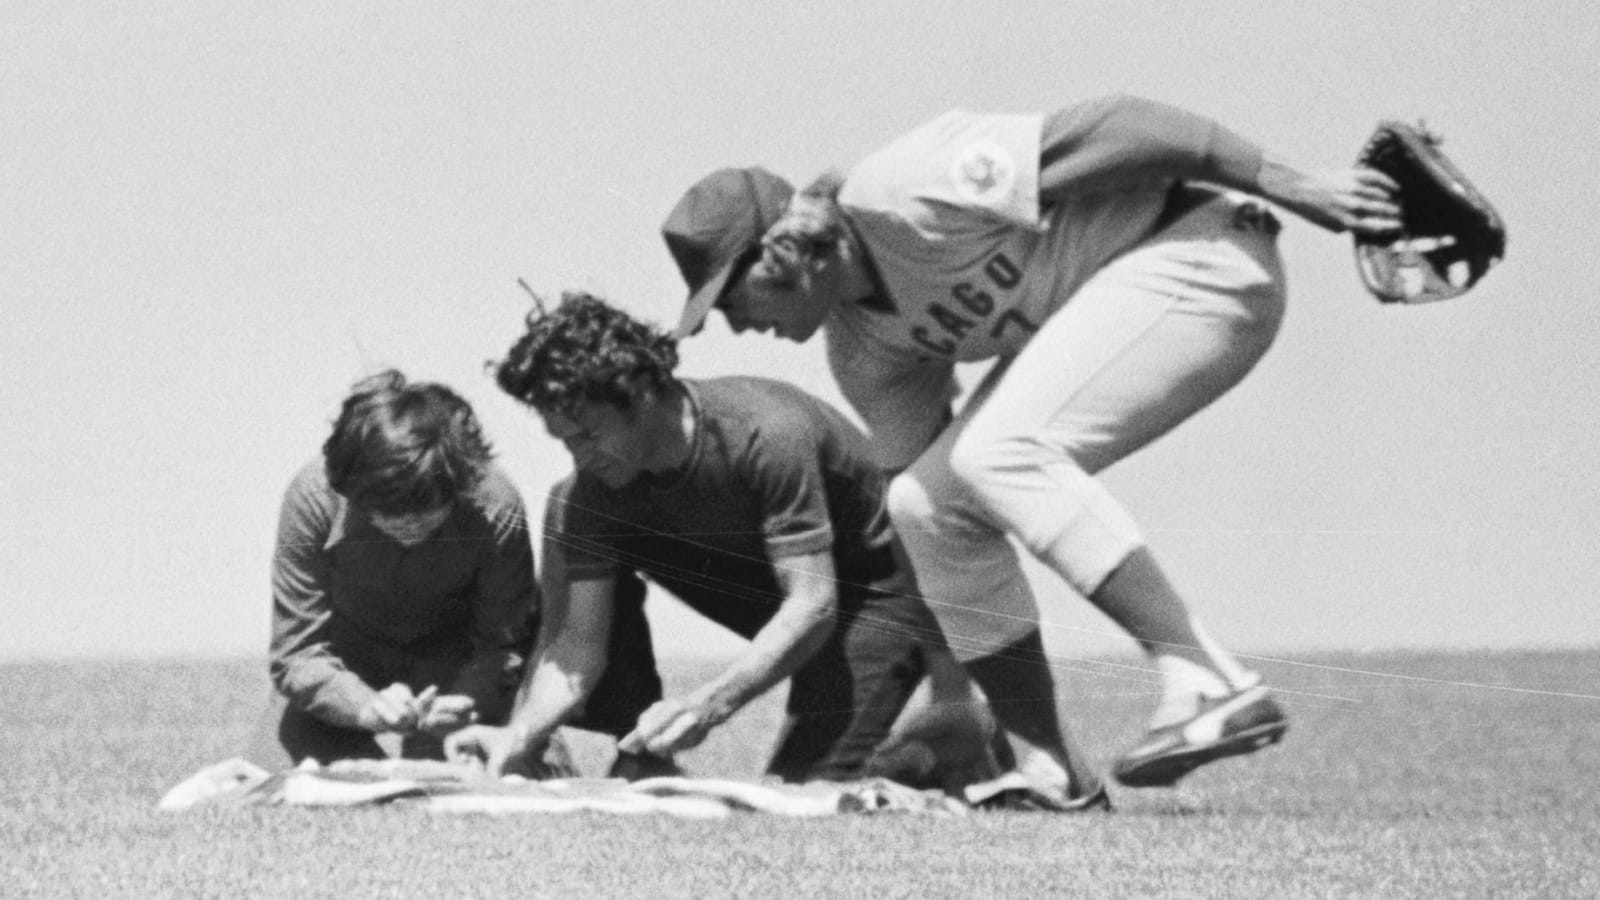 Rick Monday and the Flag-Burning Incident in 1976